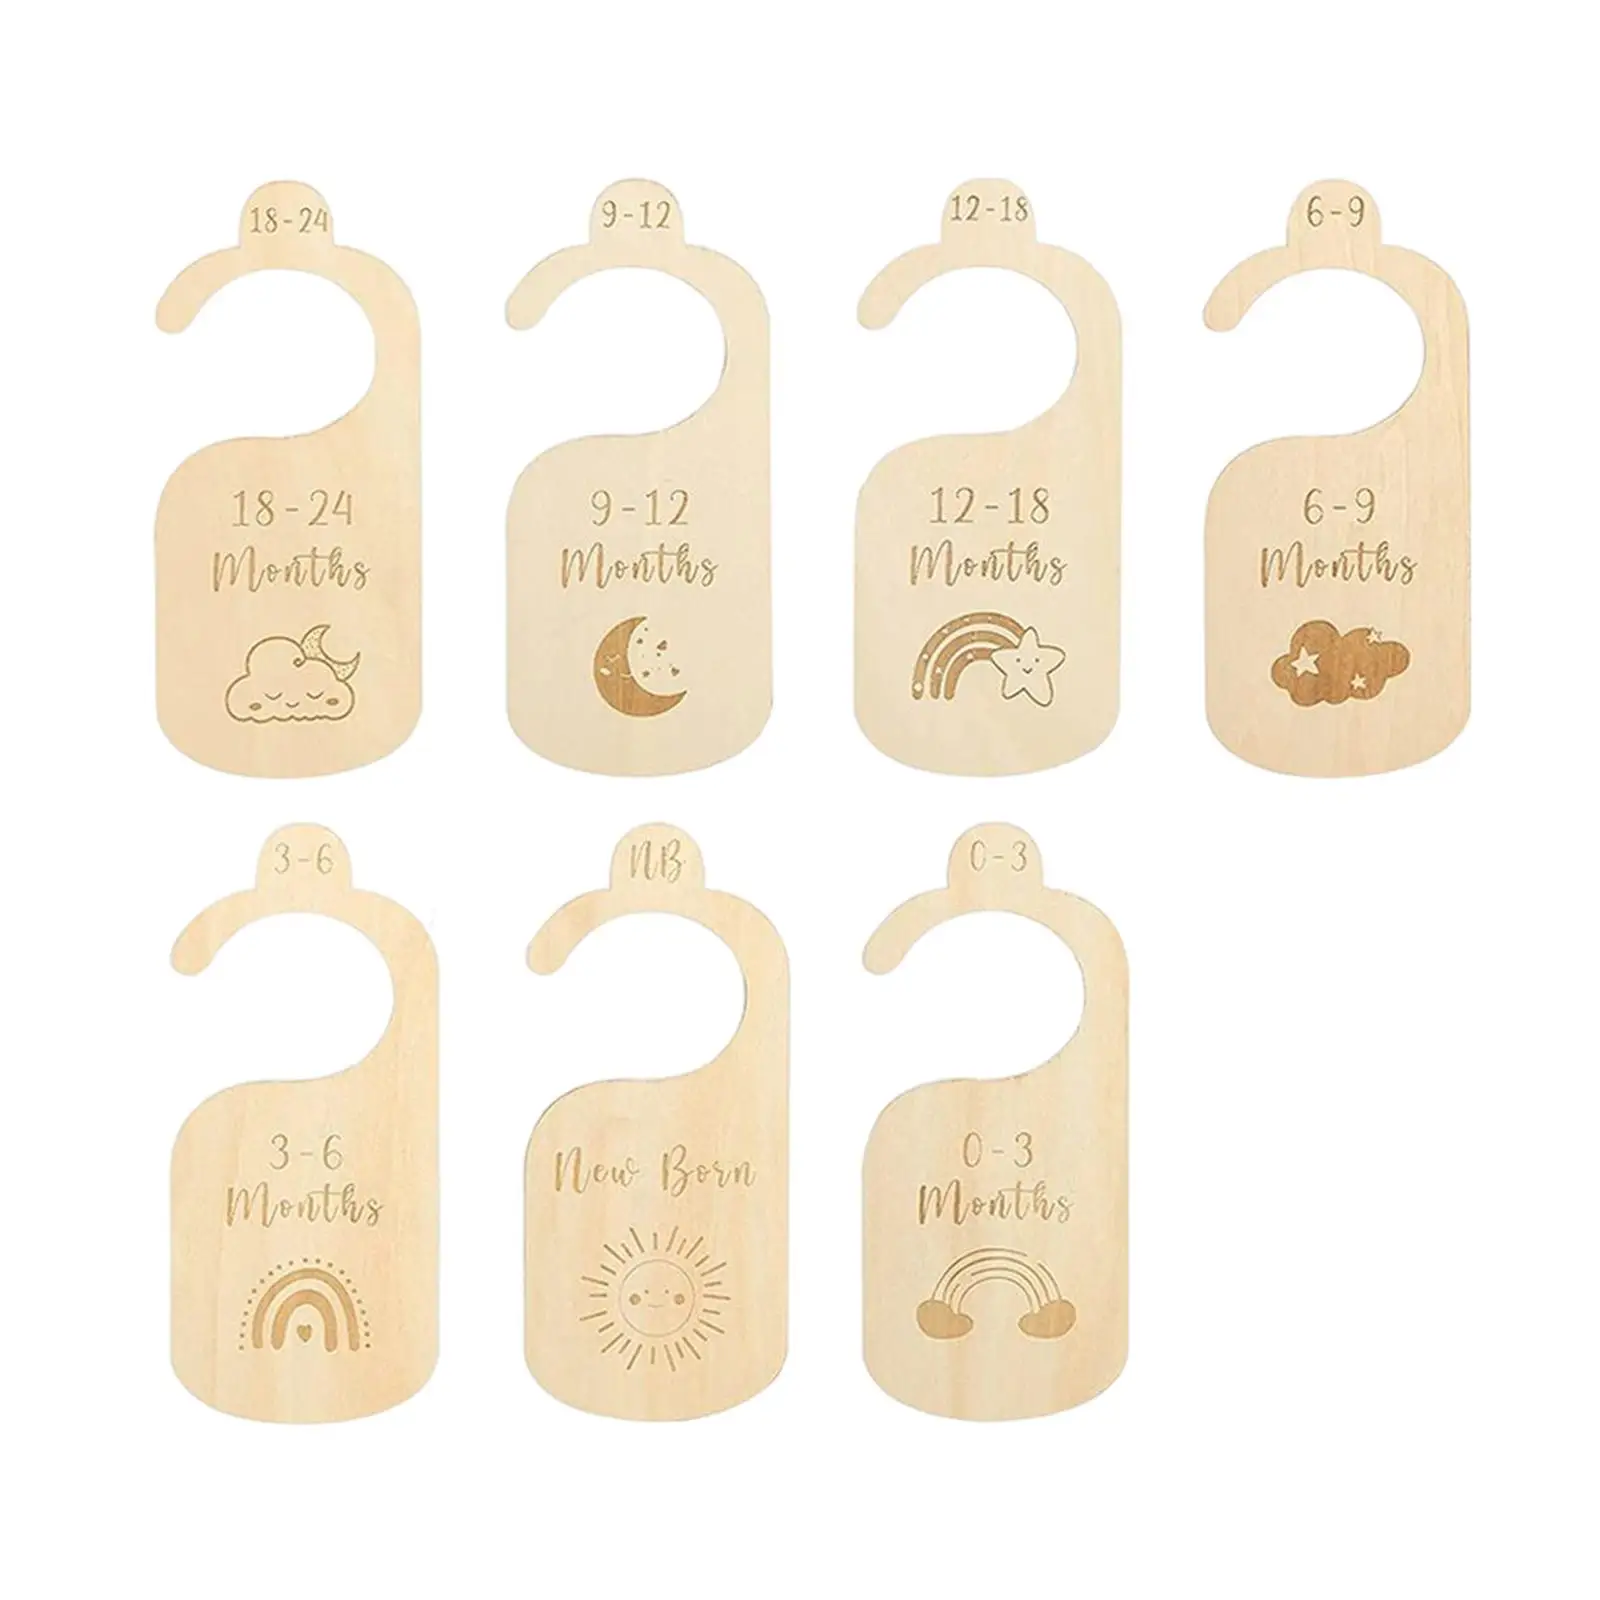 7x Double Sided Wooden Closet Divider Organizer Closet Baby Size Dividers Infant Wardrobe Divider Label New Mom Gift